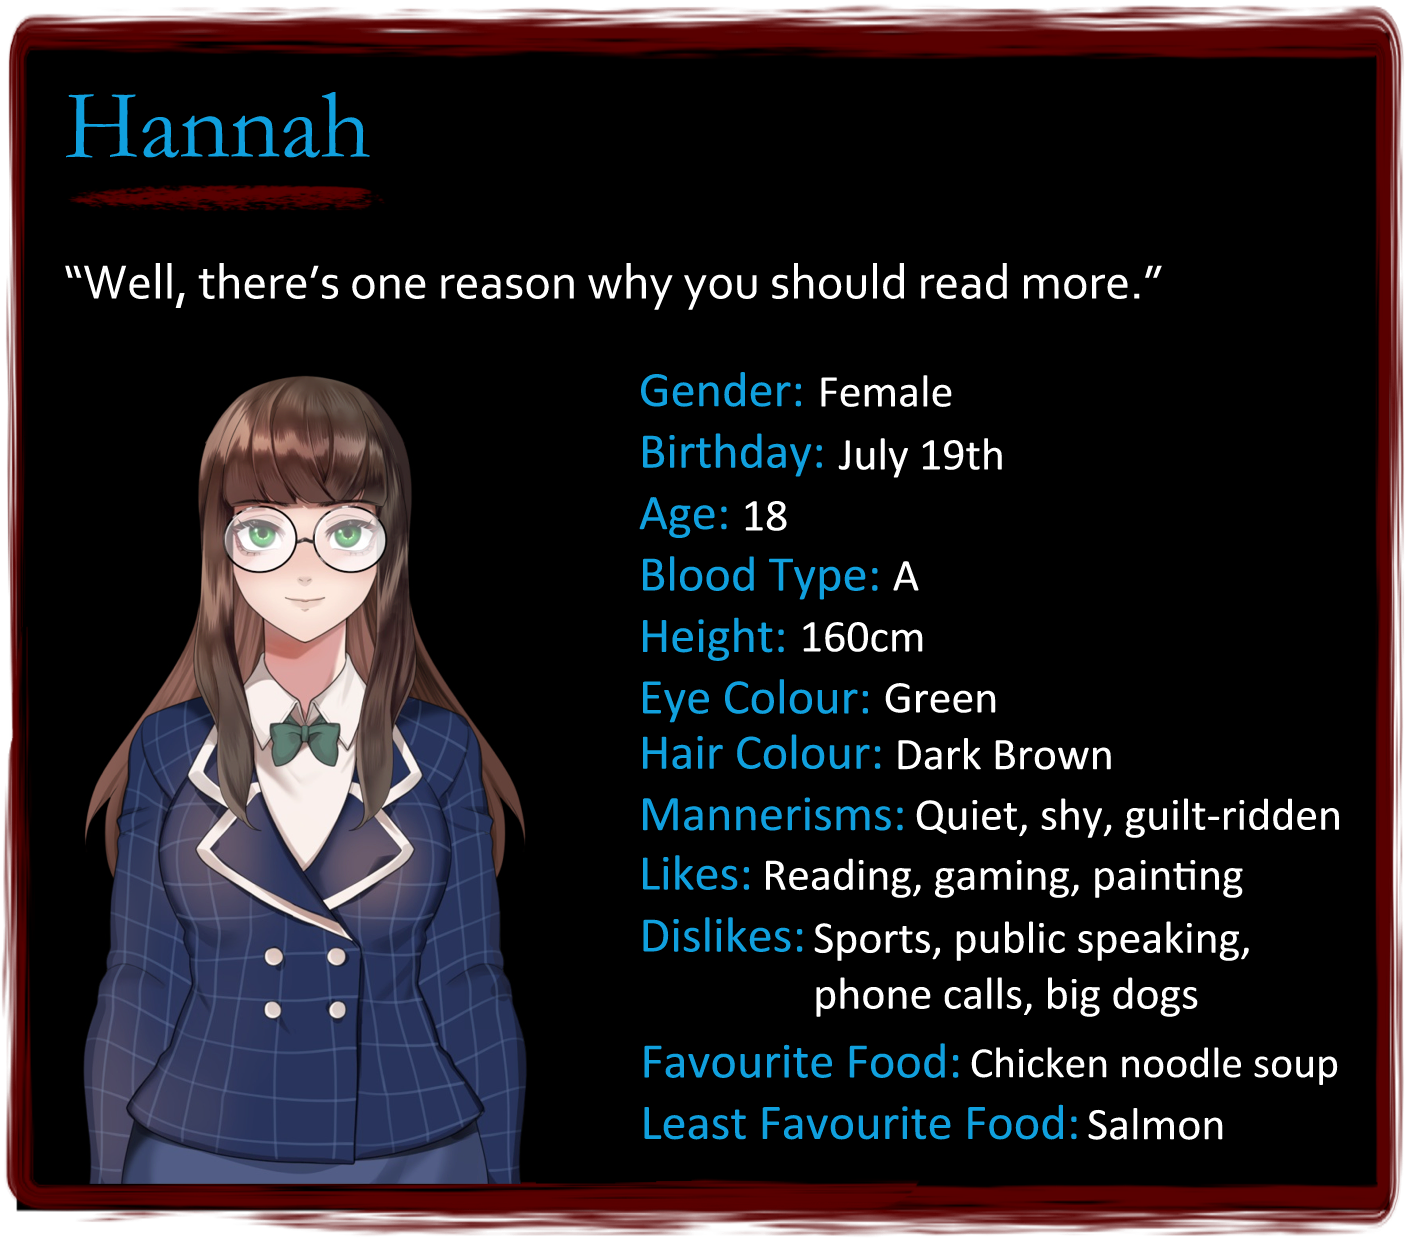 A profile card containing information about Hannah, one of the characters in The Many Deaths of Lily Kosen